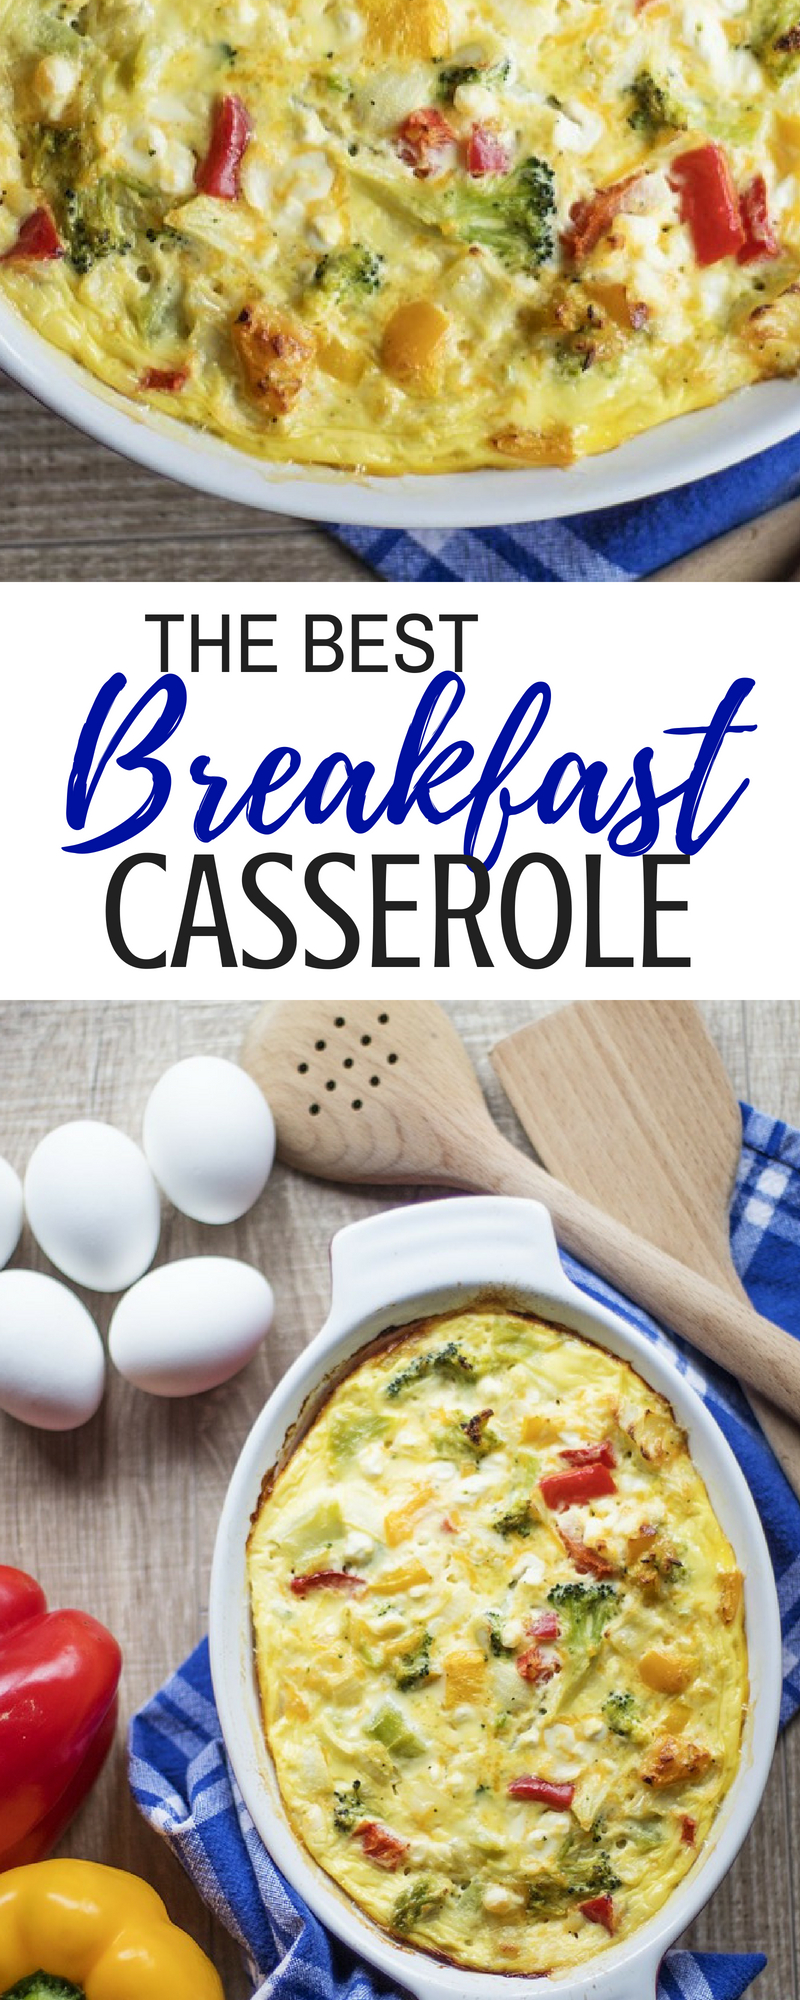 Breakfast casserole One Dish Baking: Breakfast Casserole Recipe This breakfast casserole recipe is an all time favorite and the best breakfast casserole you will ever make!  Perfect for when company comes or for a Sunday morning brunch, make this breakfast casserole recipe the whole family will love!